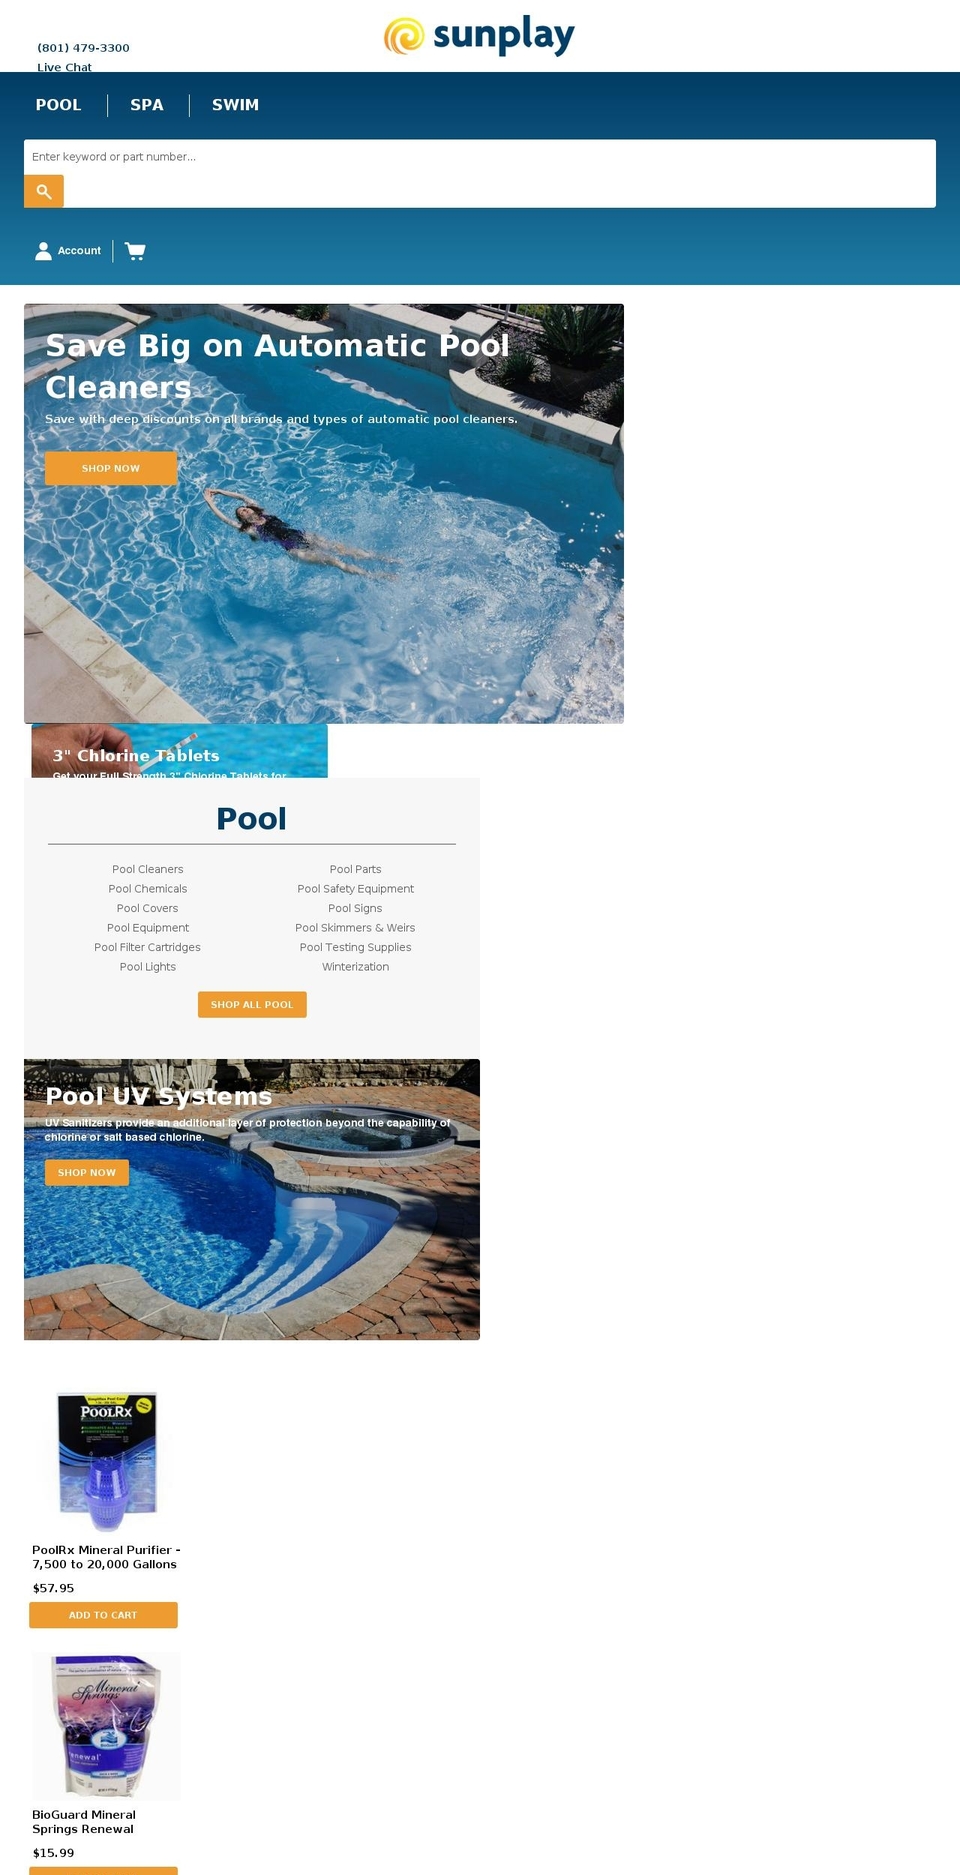 Sunplay v1.0 [Speck - Collection] Shopify theme site example sun-play.com